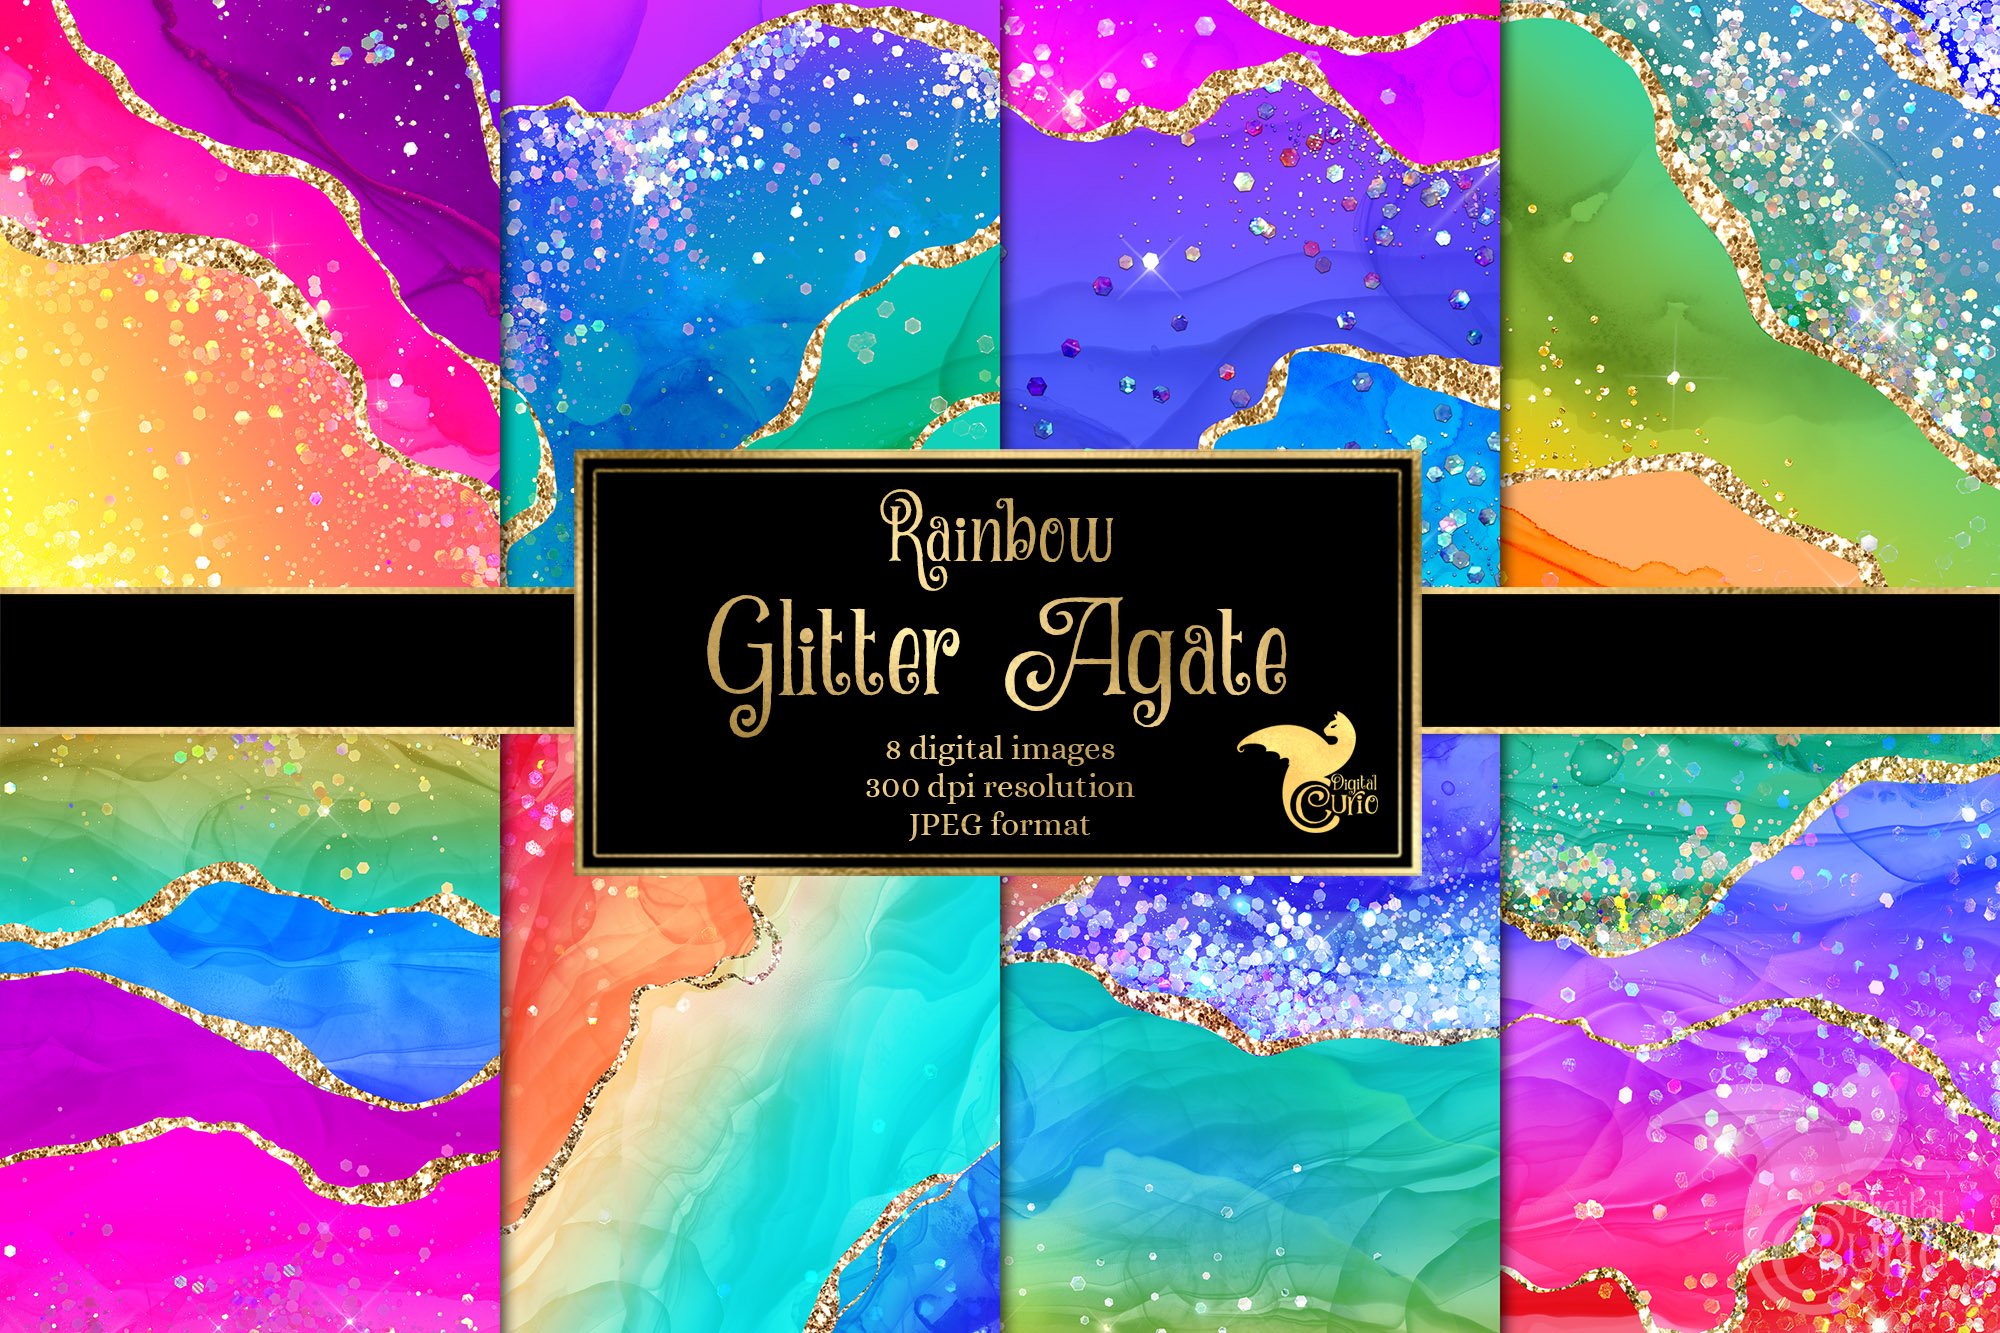 Rainbow Glitter Agate Textures cover image.